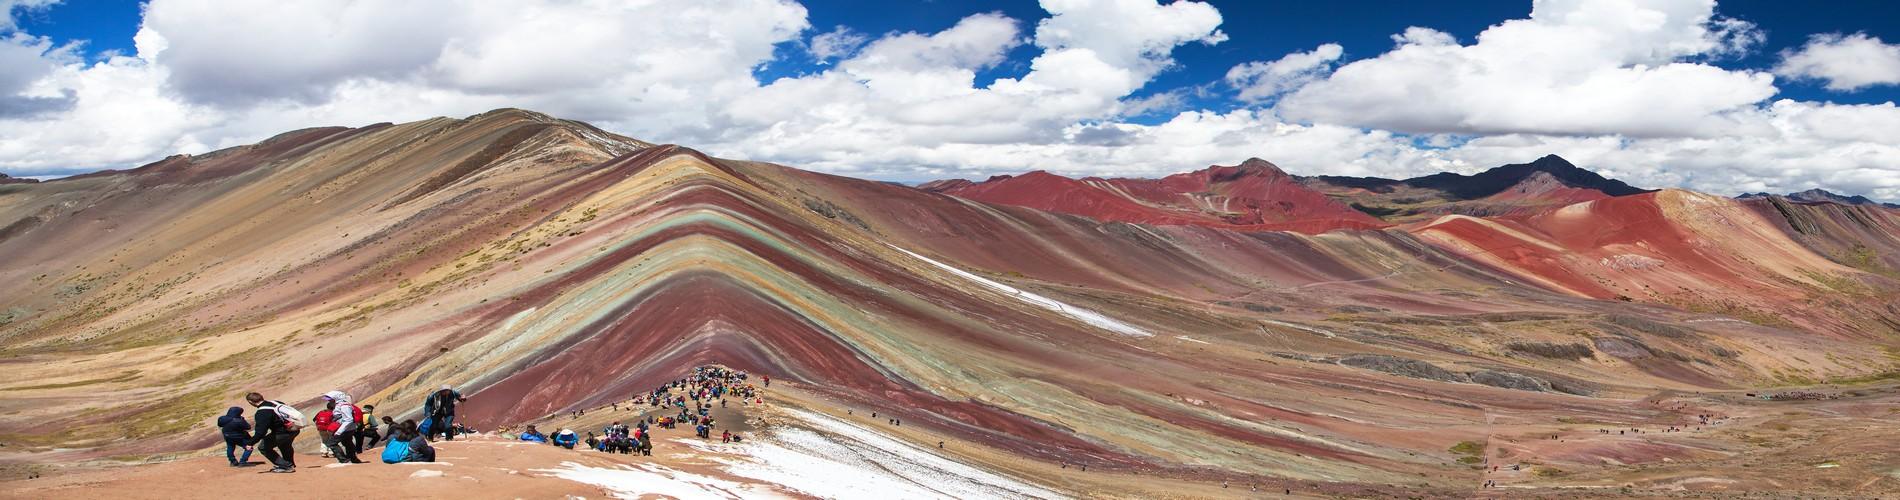 HAVE YOU THOUGHT ABOUT PERU FOR YOUR NEXT SPRING BREAK DESTINATION?